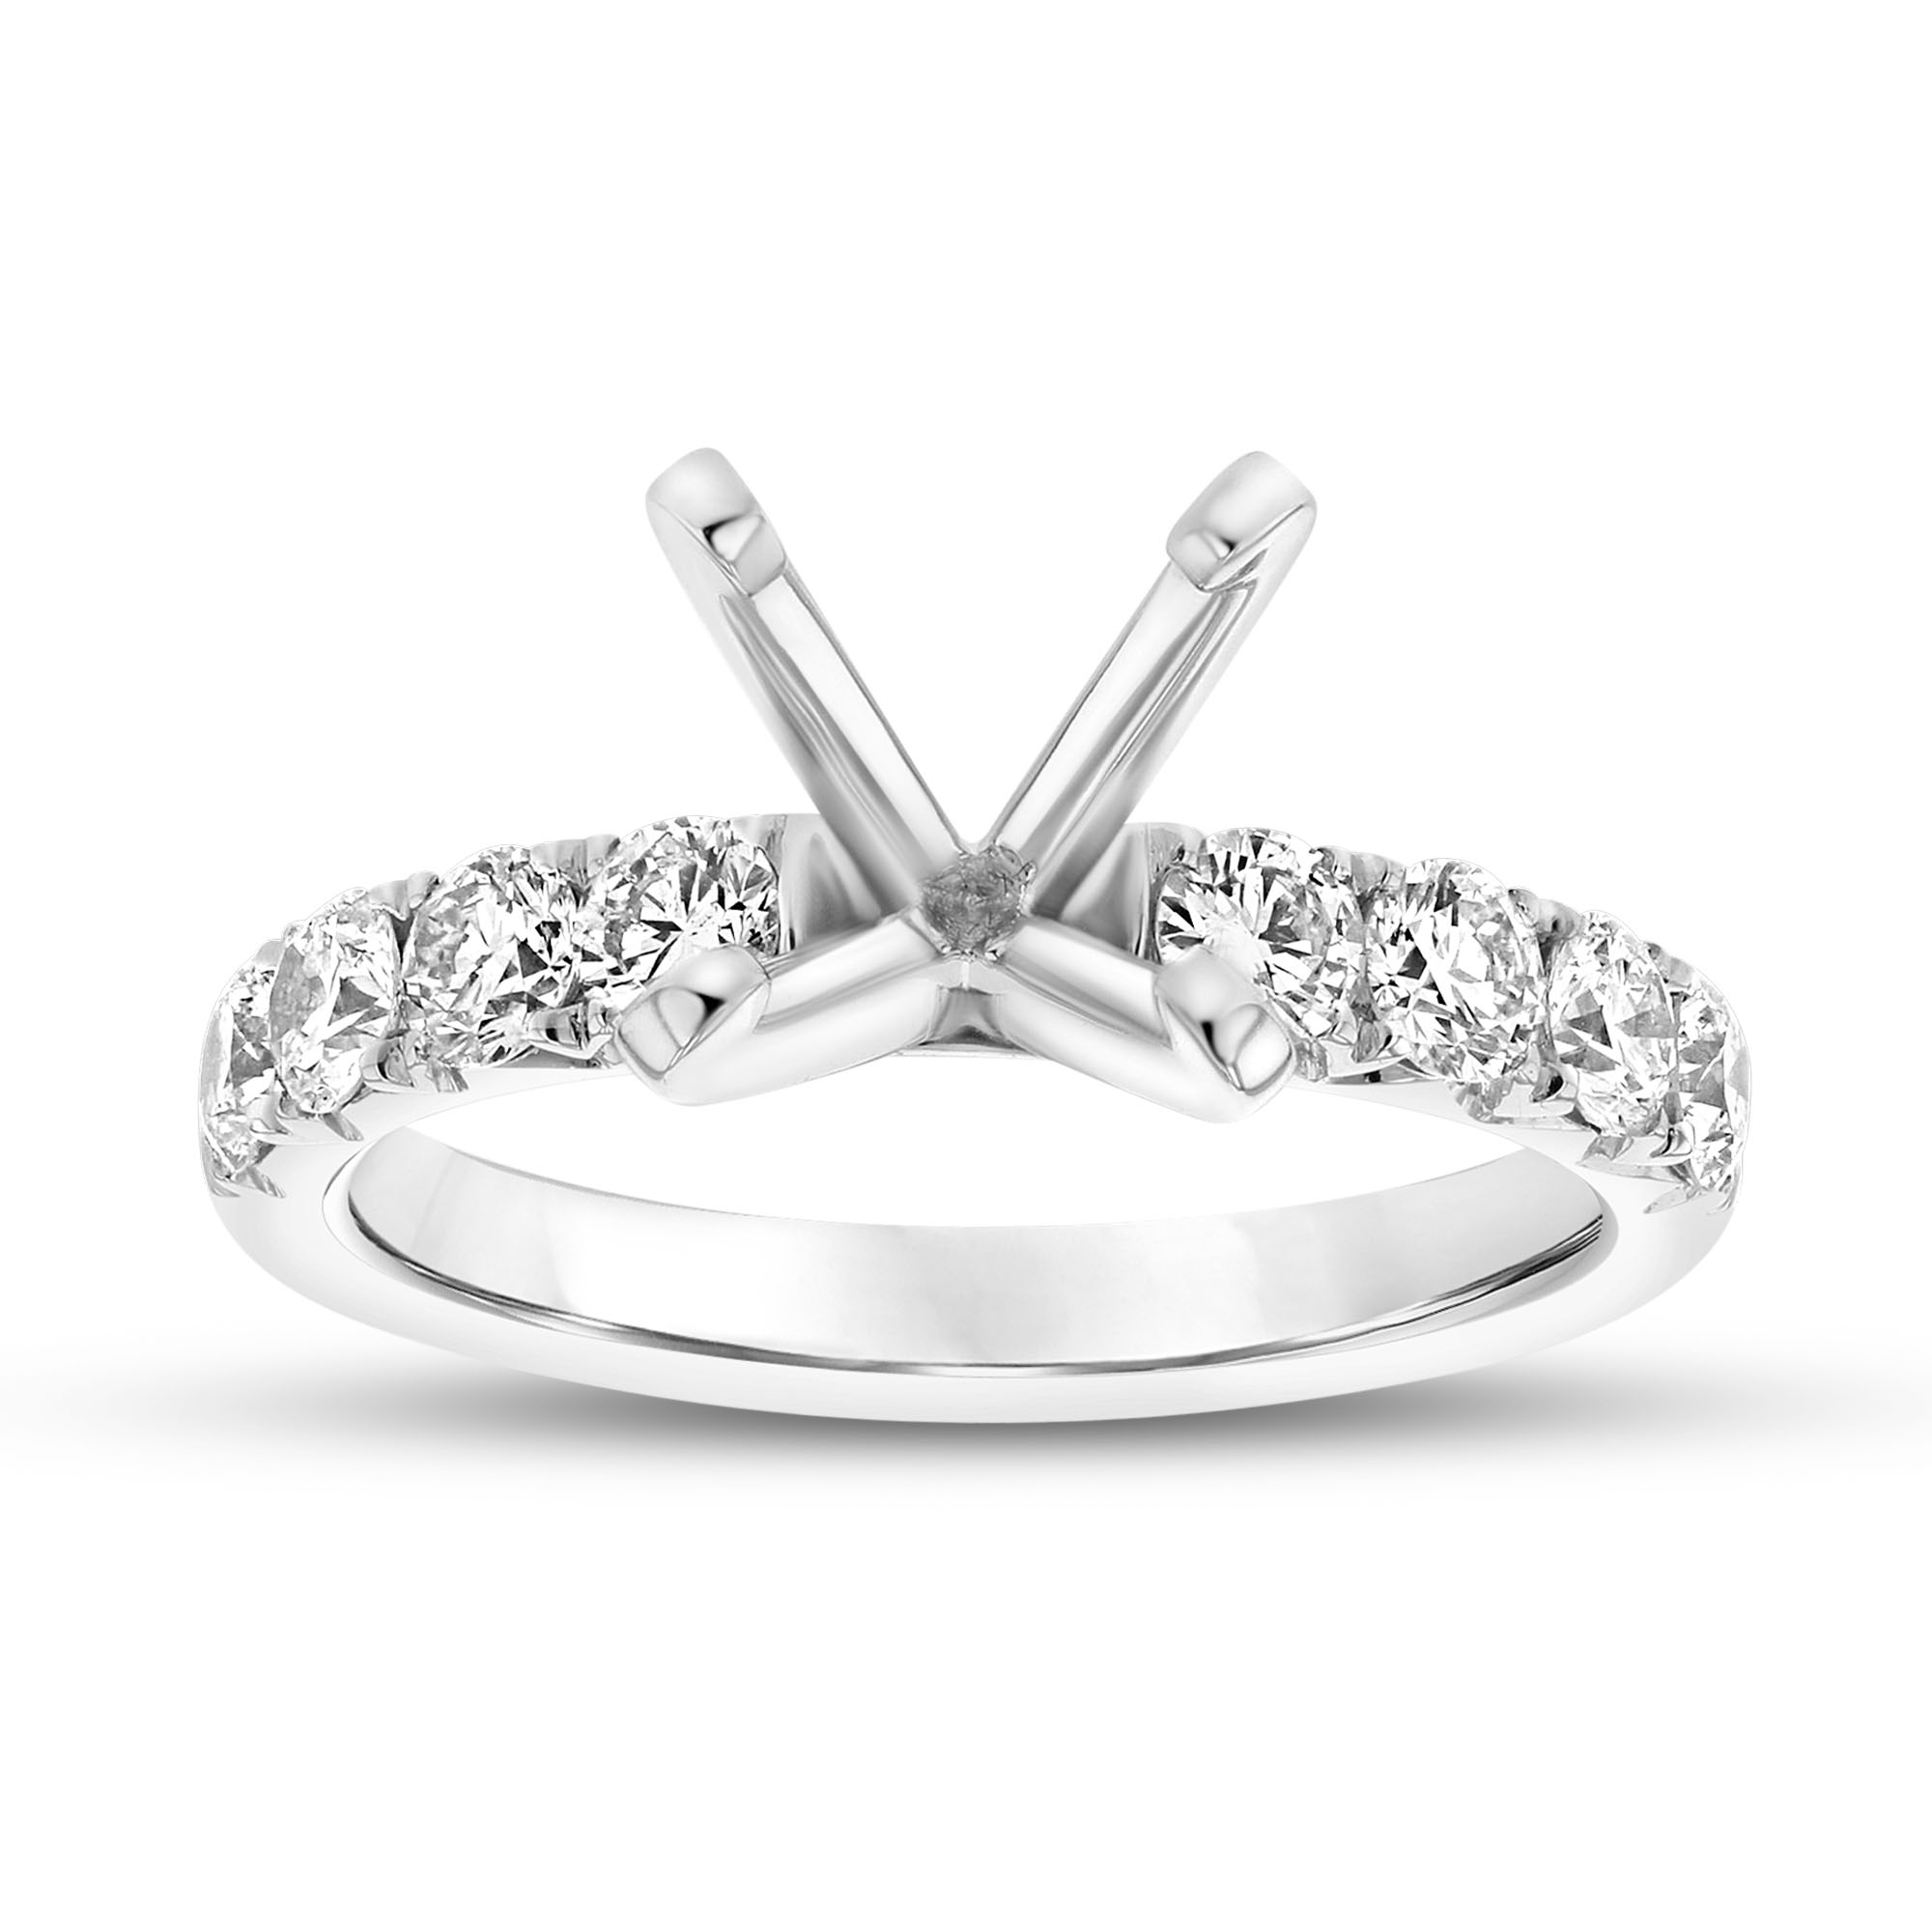 View 0.89ctw Diamond Semi Mount Engagement Ring in 18k White Gold